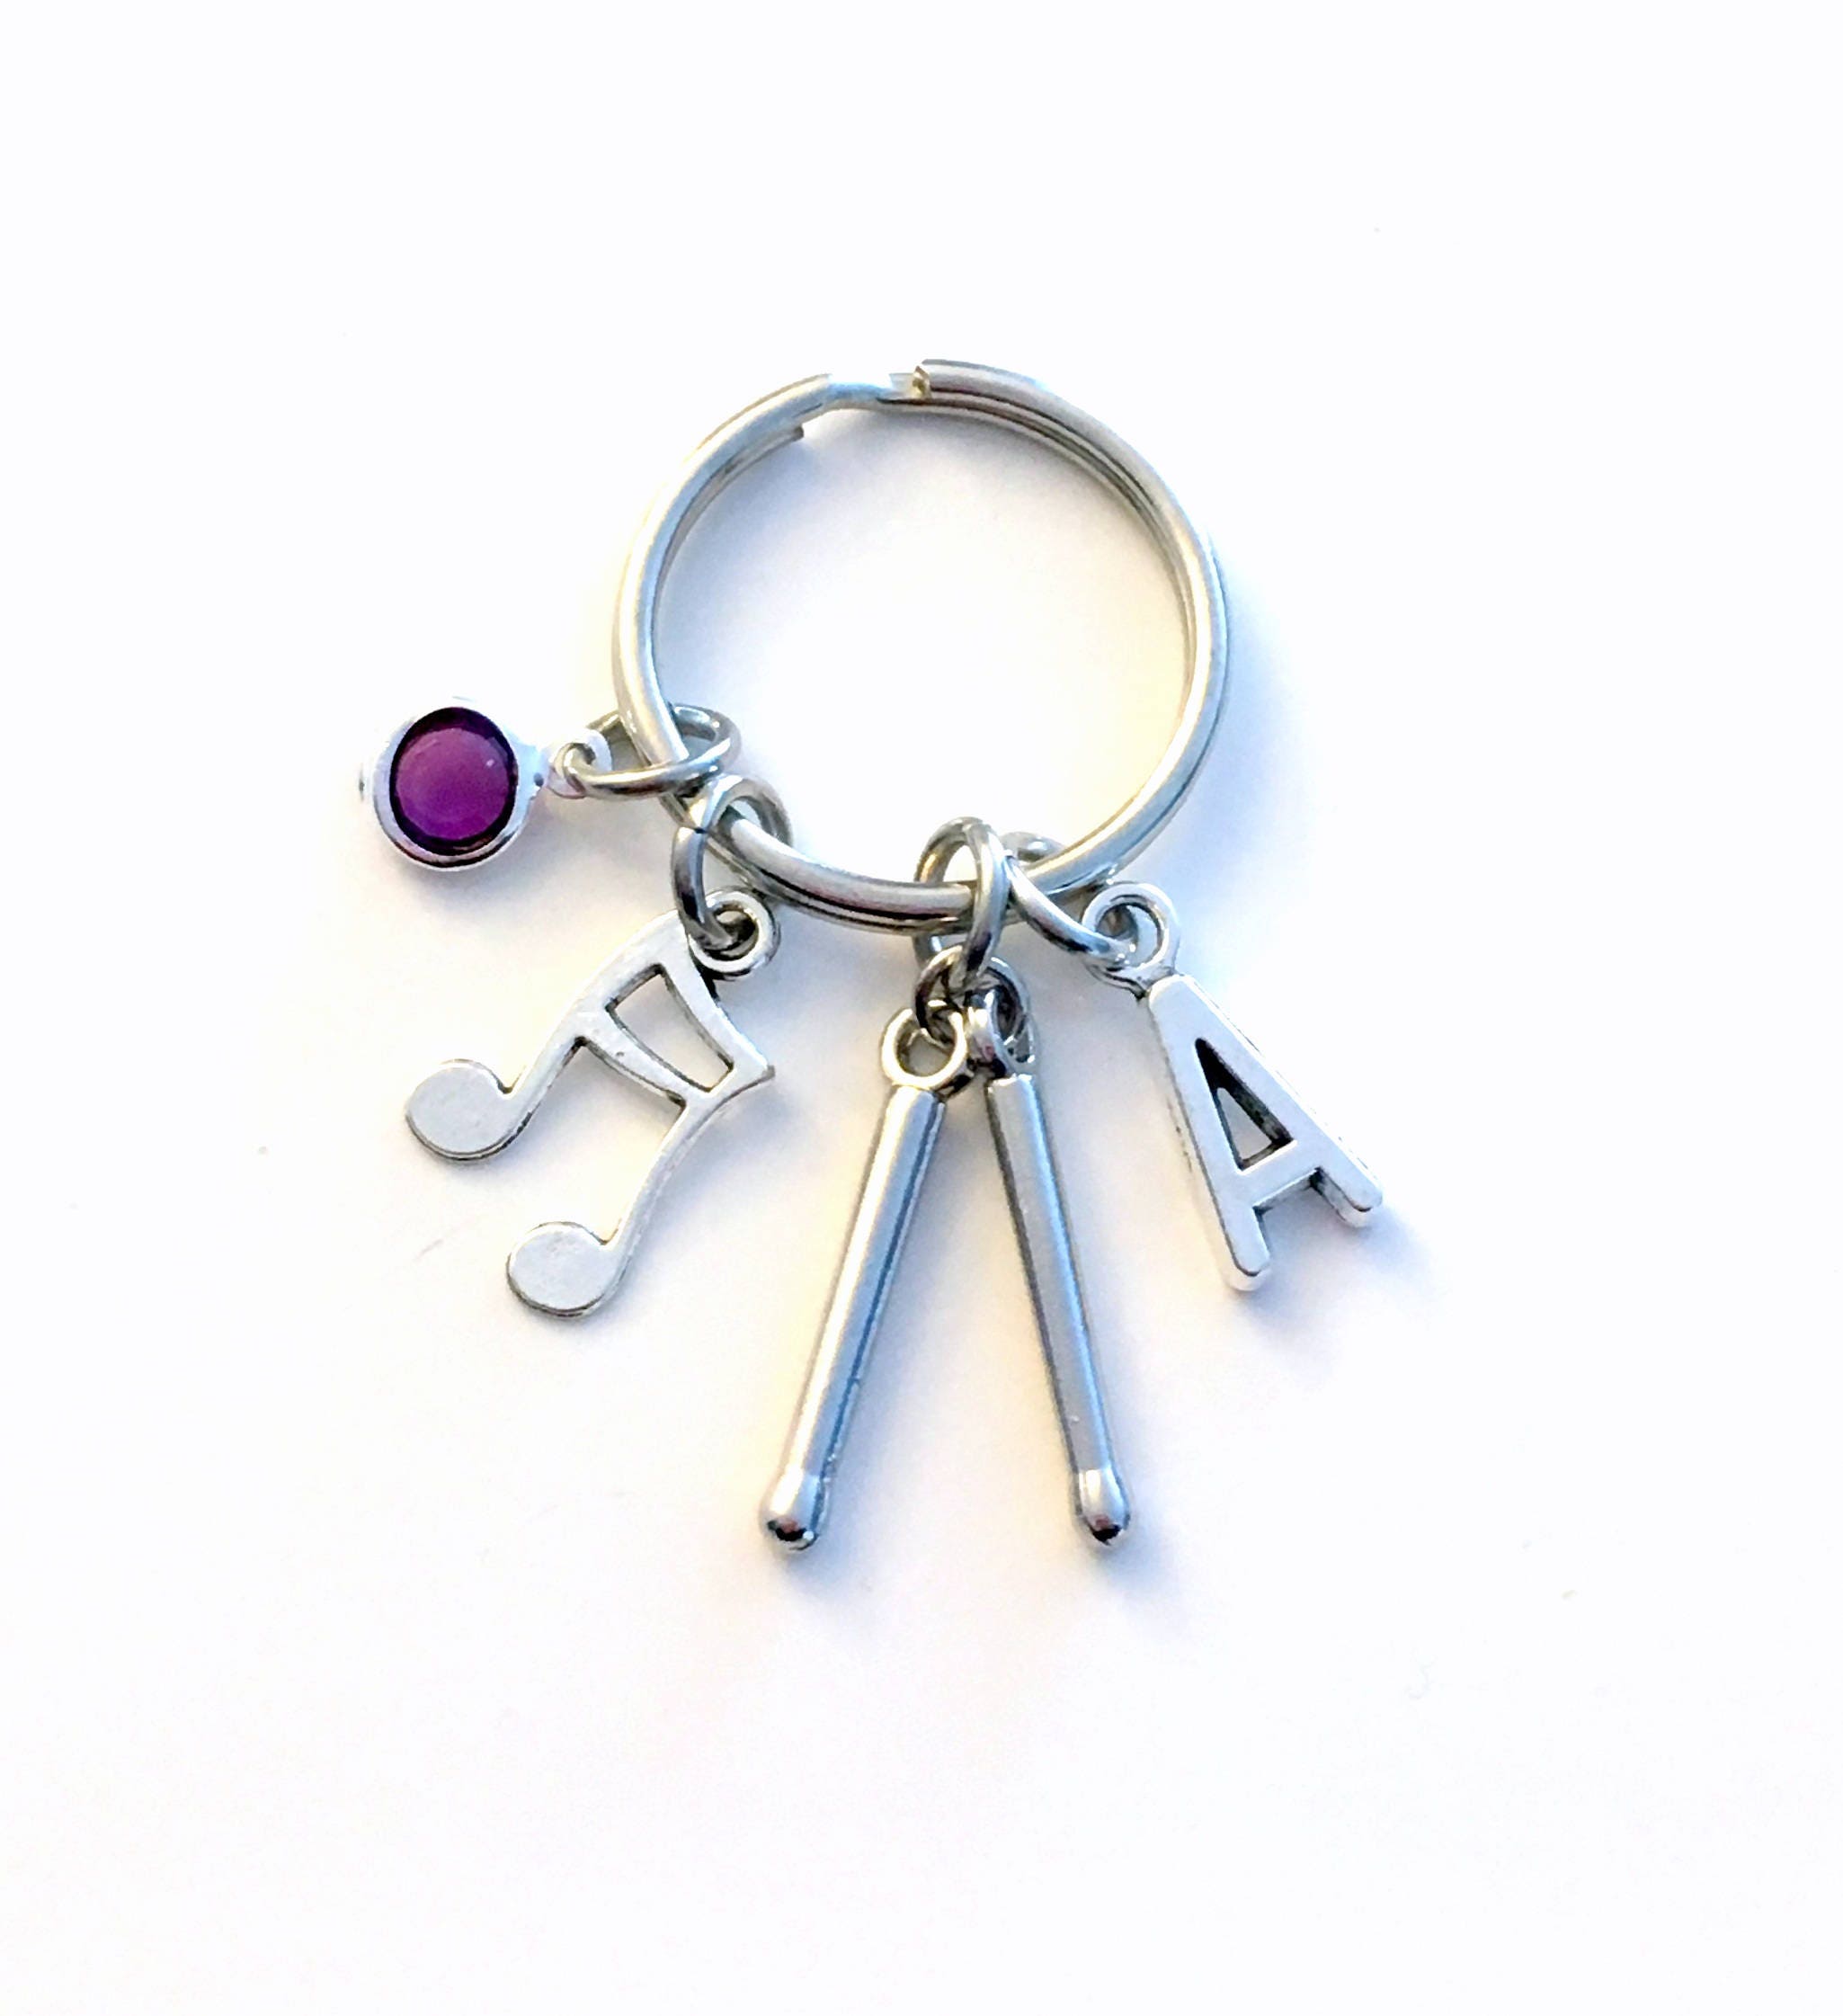 Female Drummer Stick Figure Key Chain Charm for the Rock and Roll Band  Member,music Lover or Christmas Ornament 